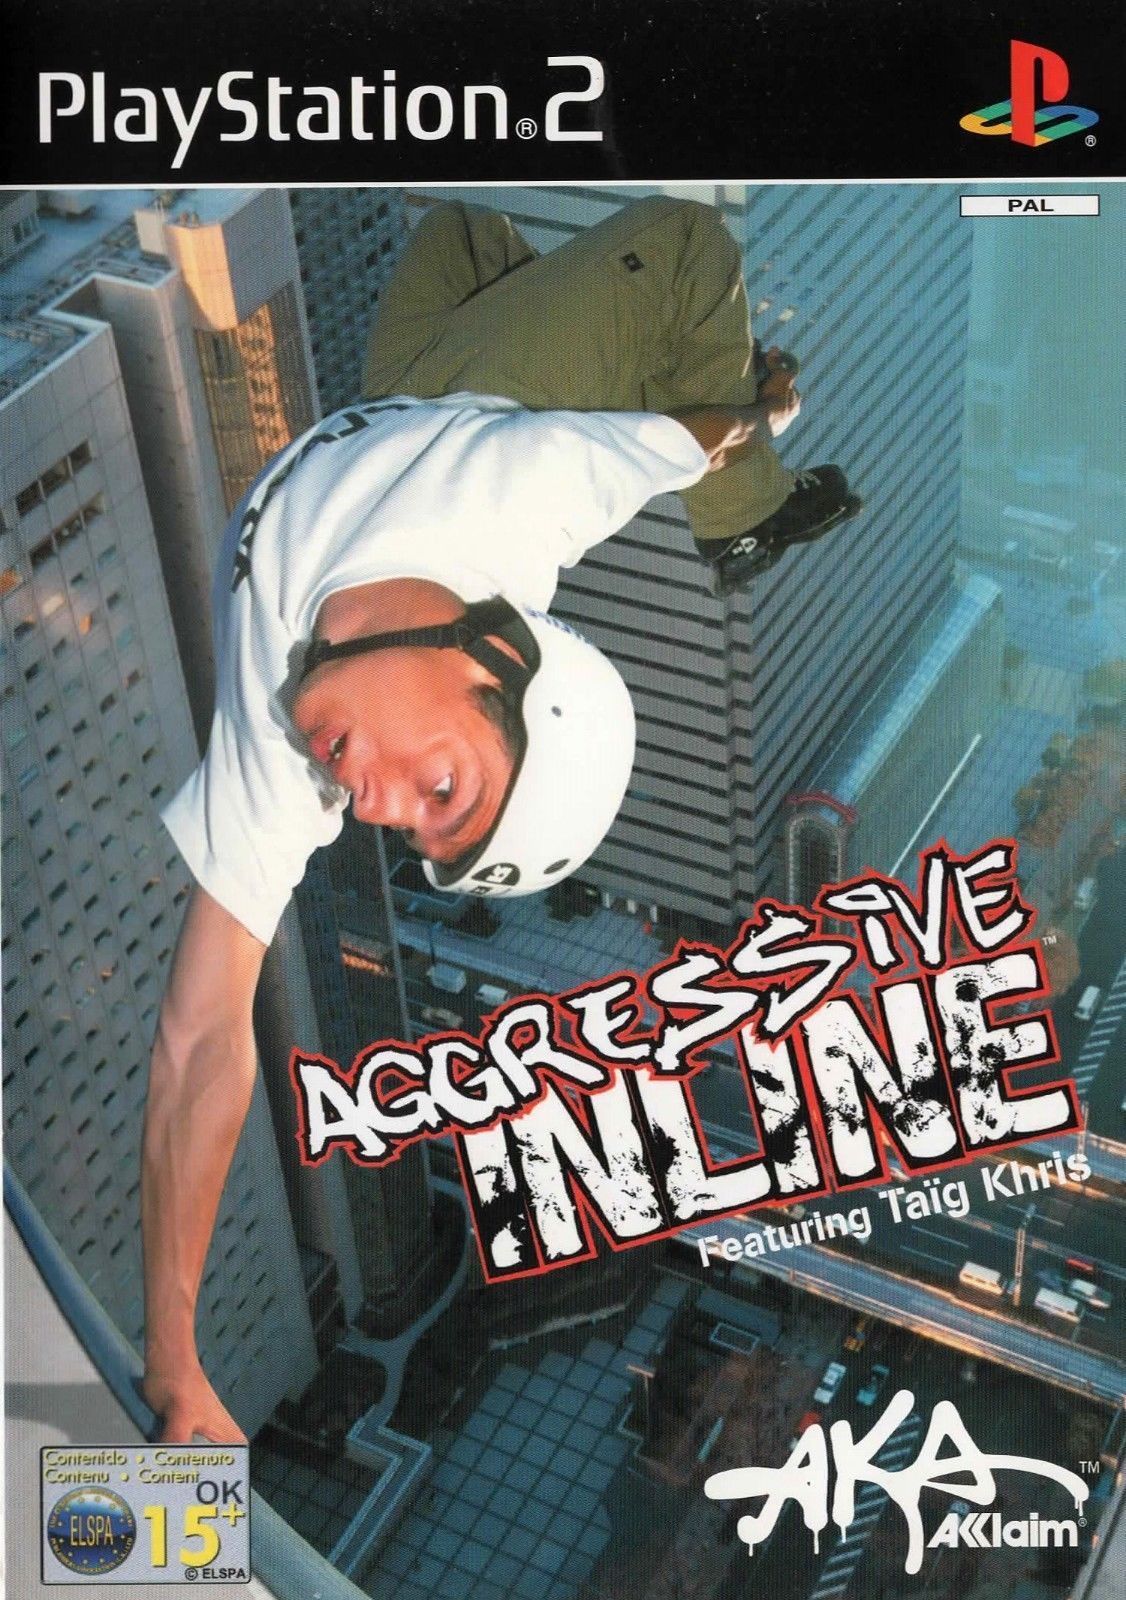 Aggresive Inline Featuring Taig Khris